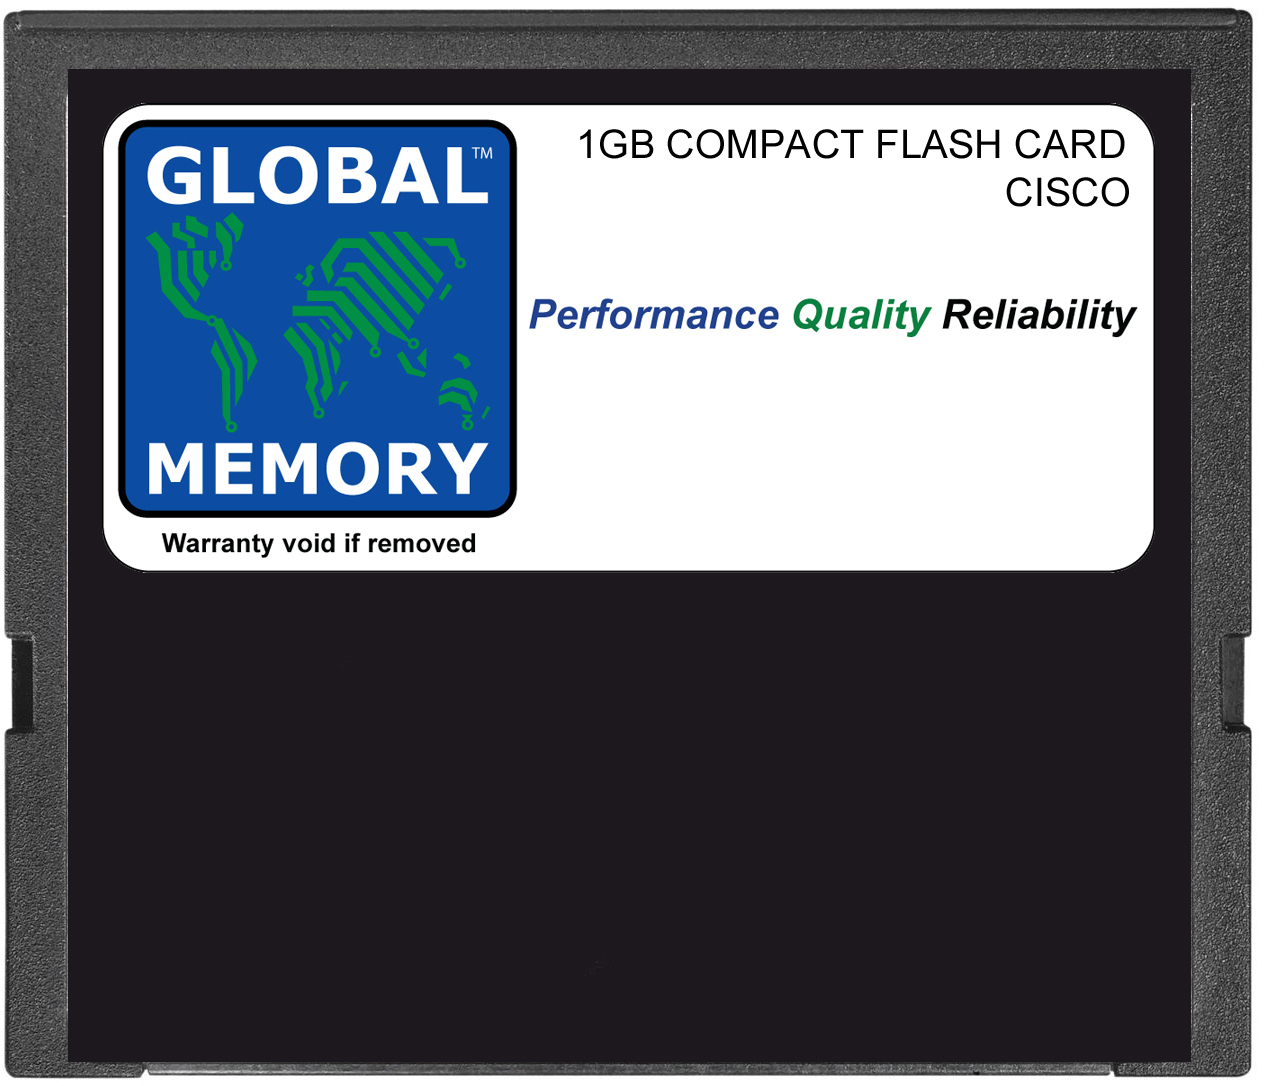 1GB COMPACT FLASH CARD MEMORY FOR CISCO CATALYST 6500 SERIES SWITCHES & 7600 SERIES ROUTERS 720 RSP (MEM-C6K-CPTFL1G)